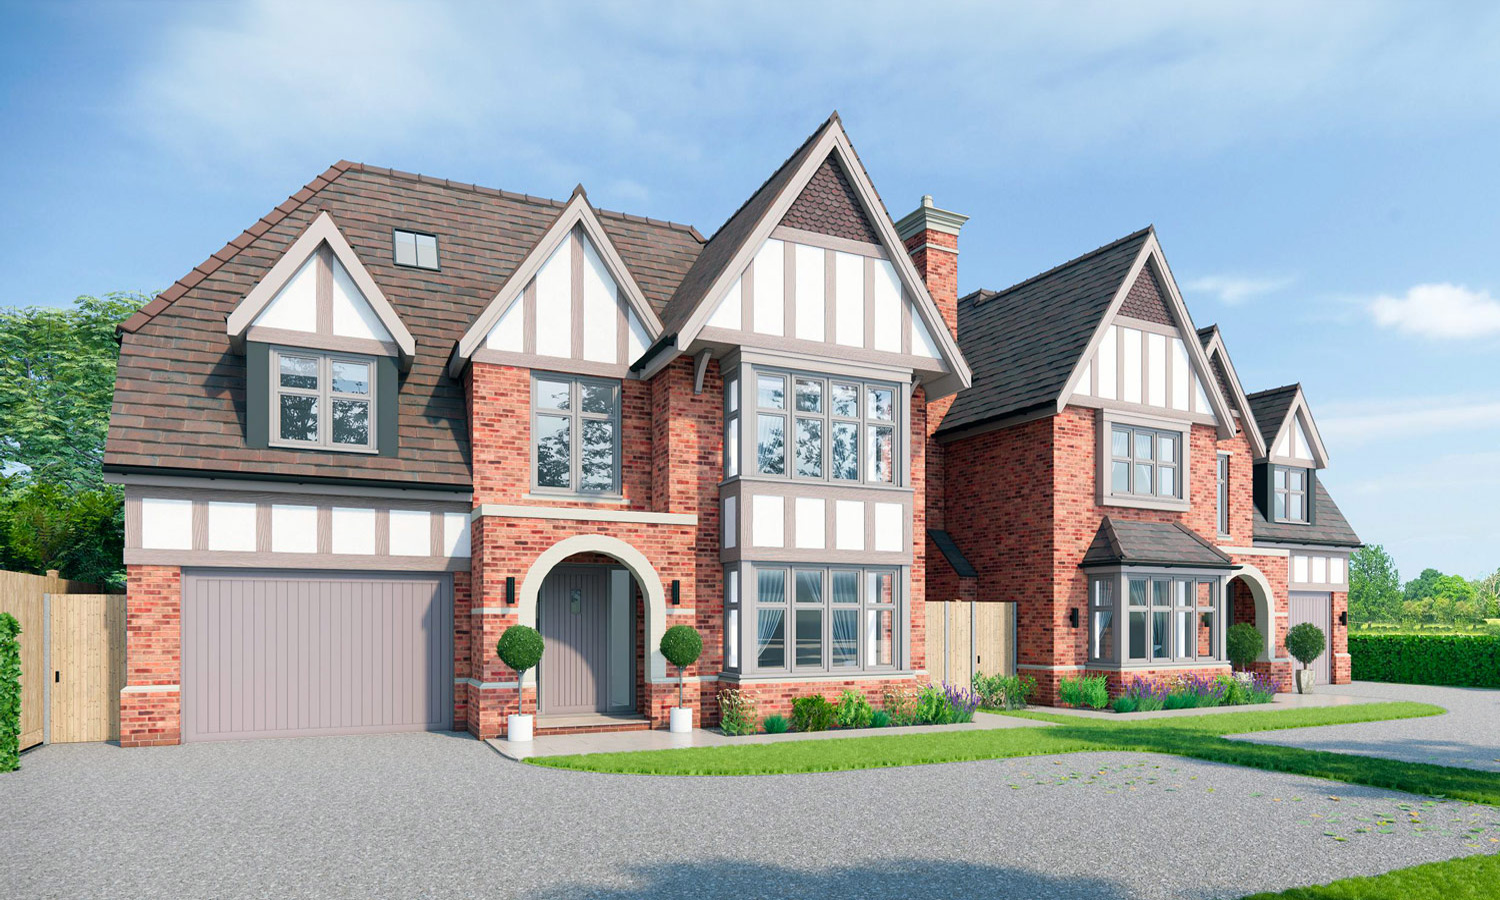 Blue Lake View - Whiteacre Homes - Solihull home builder